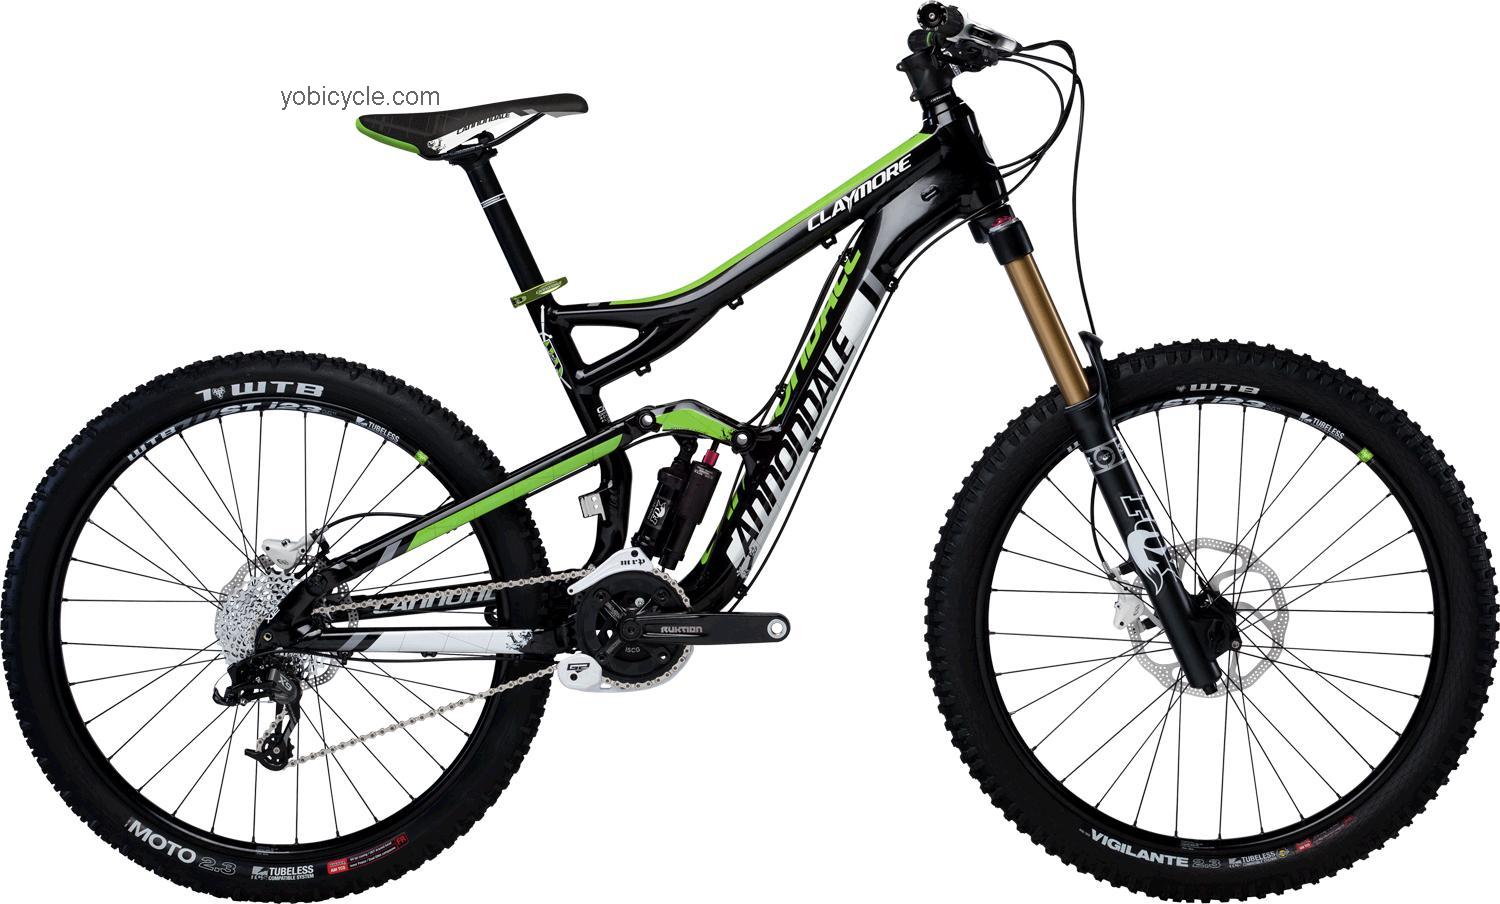 Cannondale Claymore 2 2013 comparison online with competitors